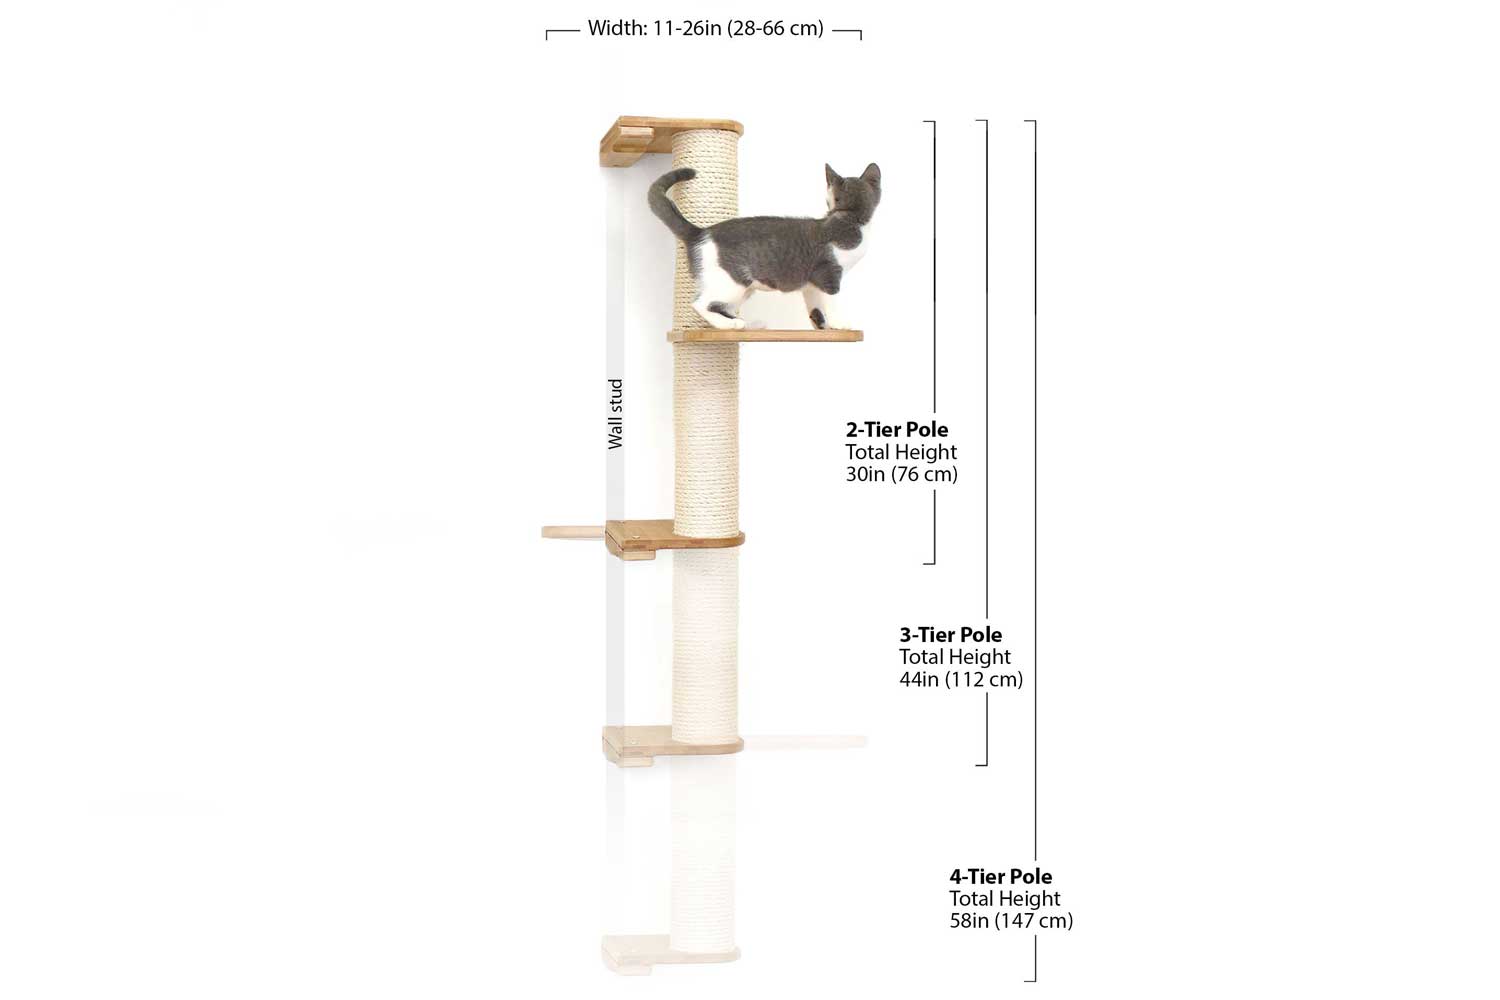 Graphic showing dimensions of sisal pole tiers, mounted on single wall stud. Width: 11-26 inches (28-66 cm) depending on Leaf Shelf being included or not. 2-tier height total: 30" (76 cm) 3-tier height total: 44" (112 cm) 4-tier height total: 58" (147 cm)